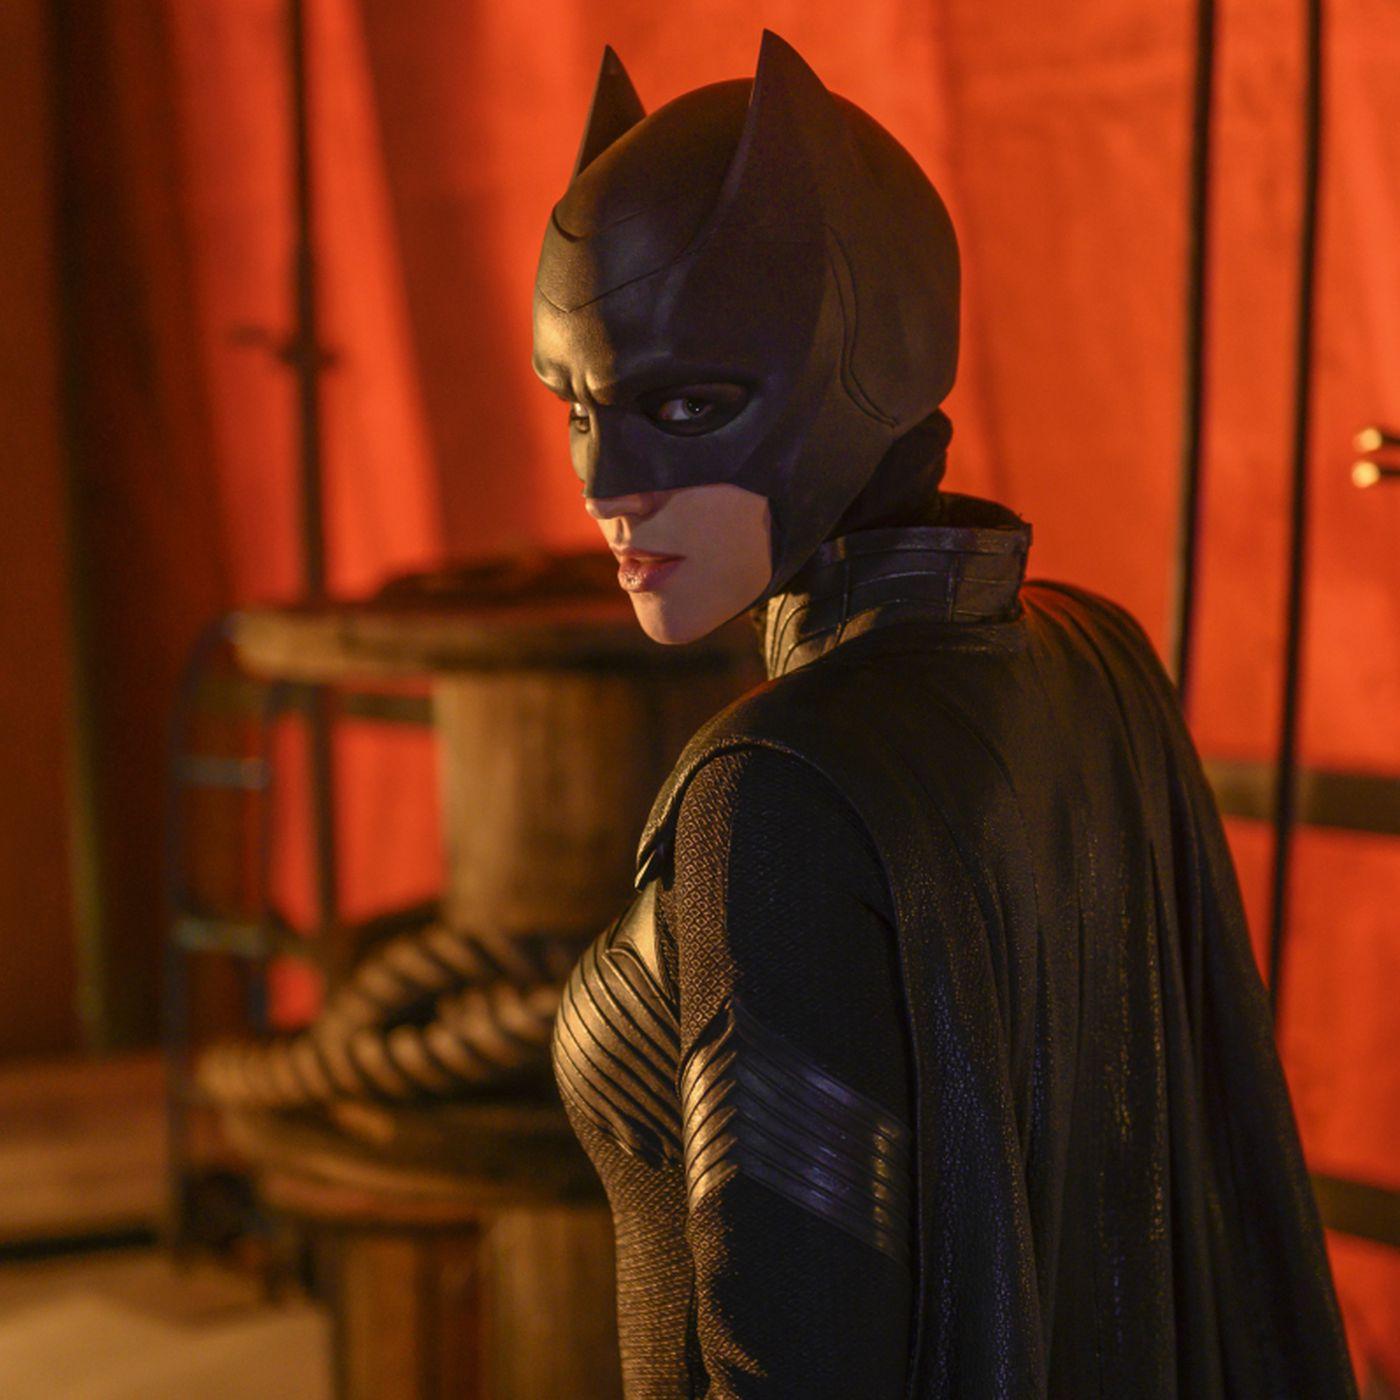 Review: Batman casts a heavy shadow over The CW's new